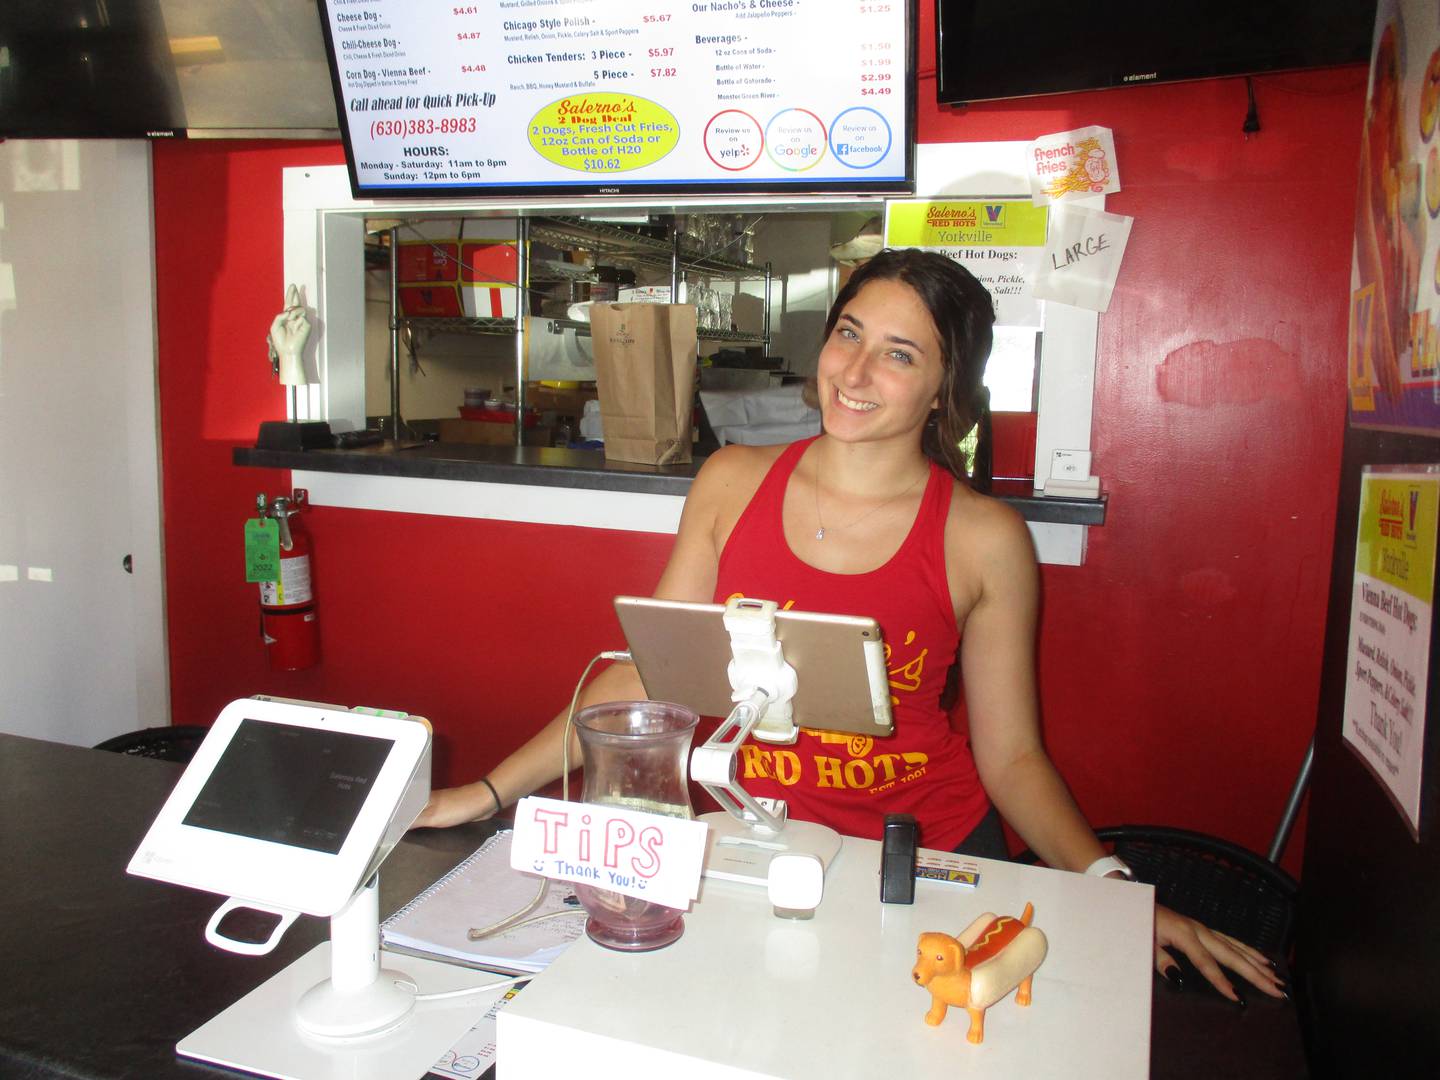 Gianna Davis of Yorkville greets customers at Salerno's Red Hots. The popular shop is rated as one of the best hot dog spots in Illinois. (Mark Foster -- mfoster@shawmedia.com)